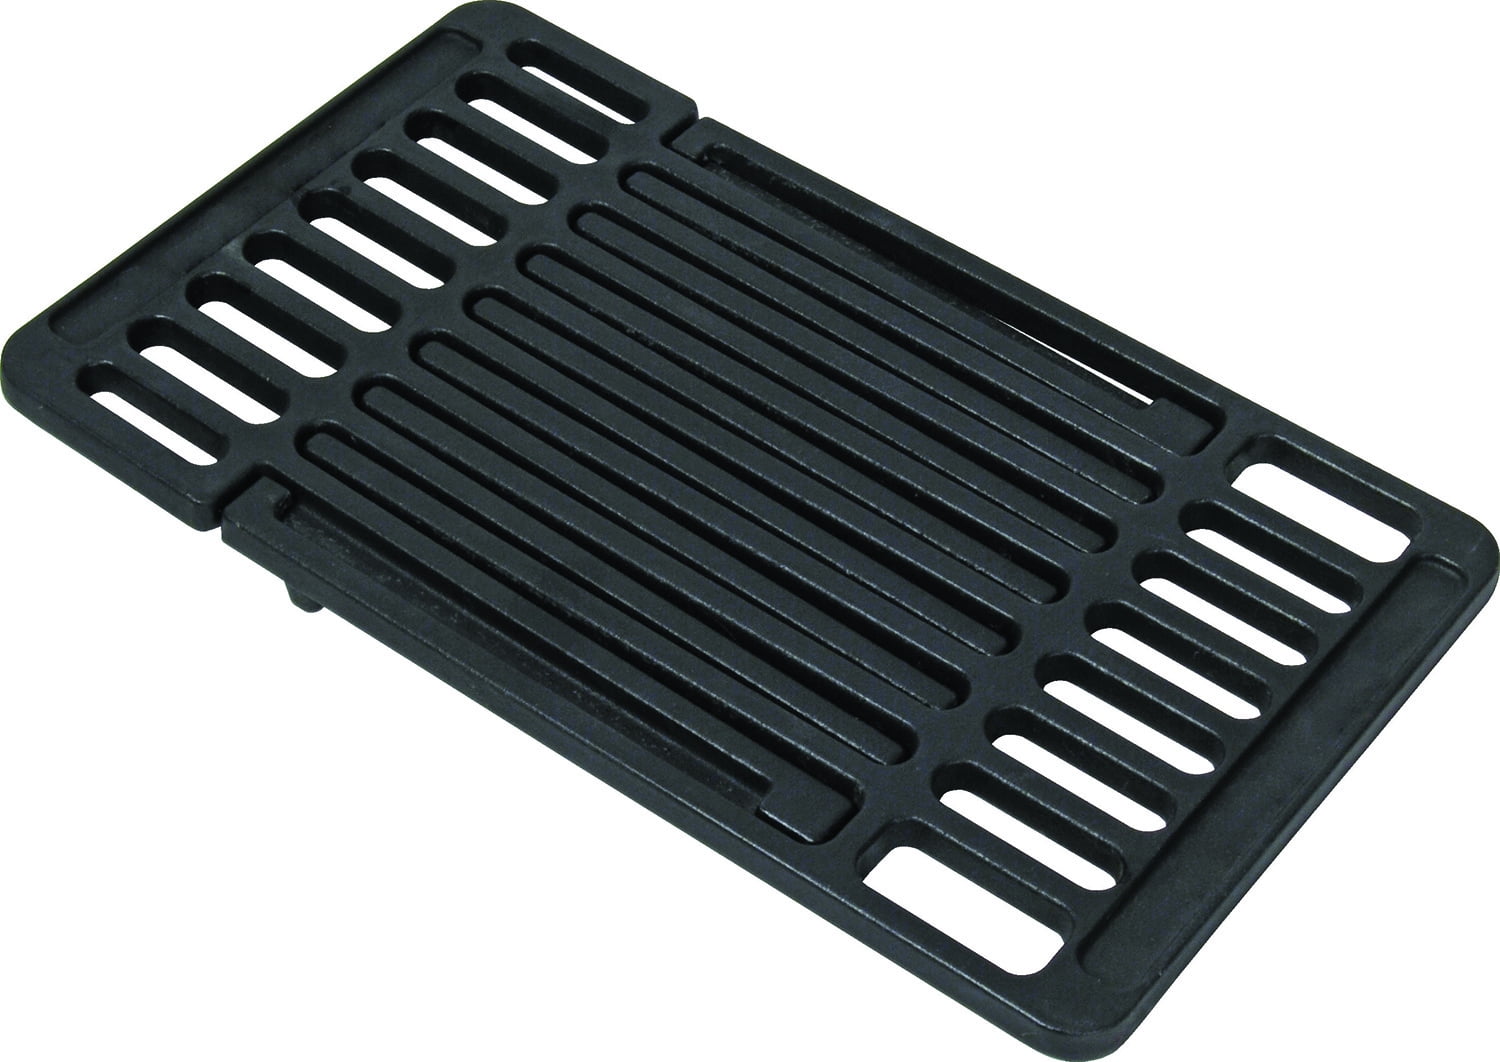 3PCS 19 1/4" x 7 7/8" Solid Stainless Steel Cooking Grids Grates for Turbo CG4.. 